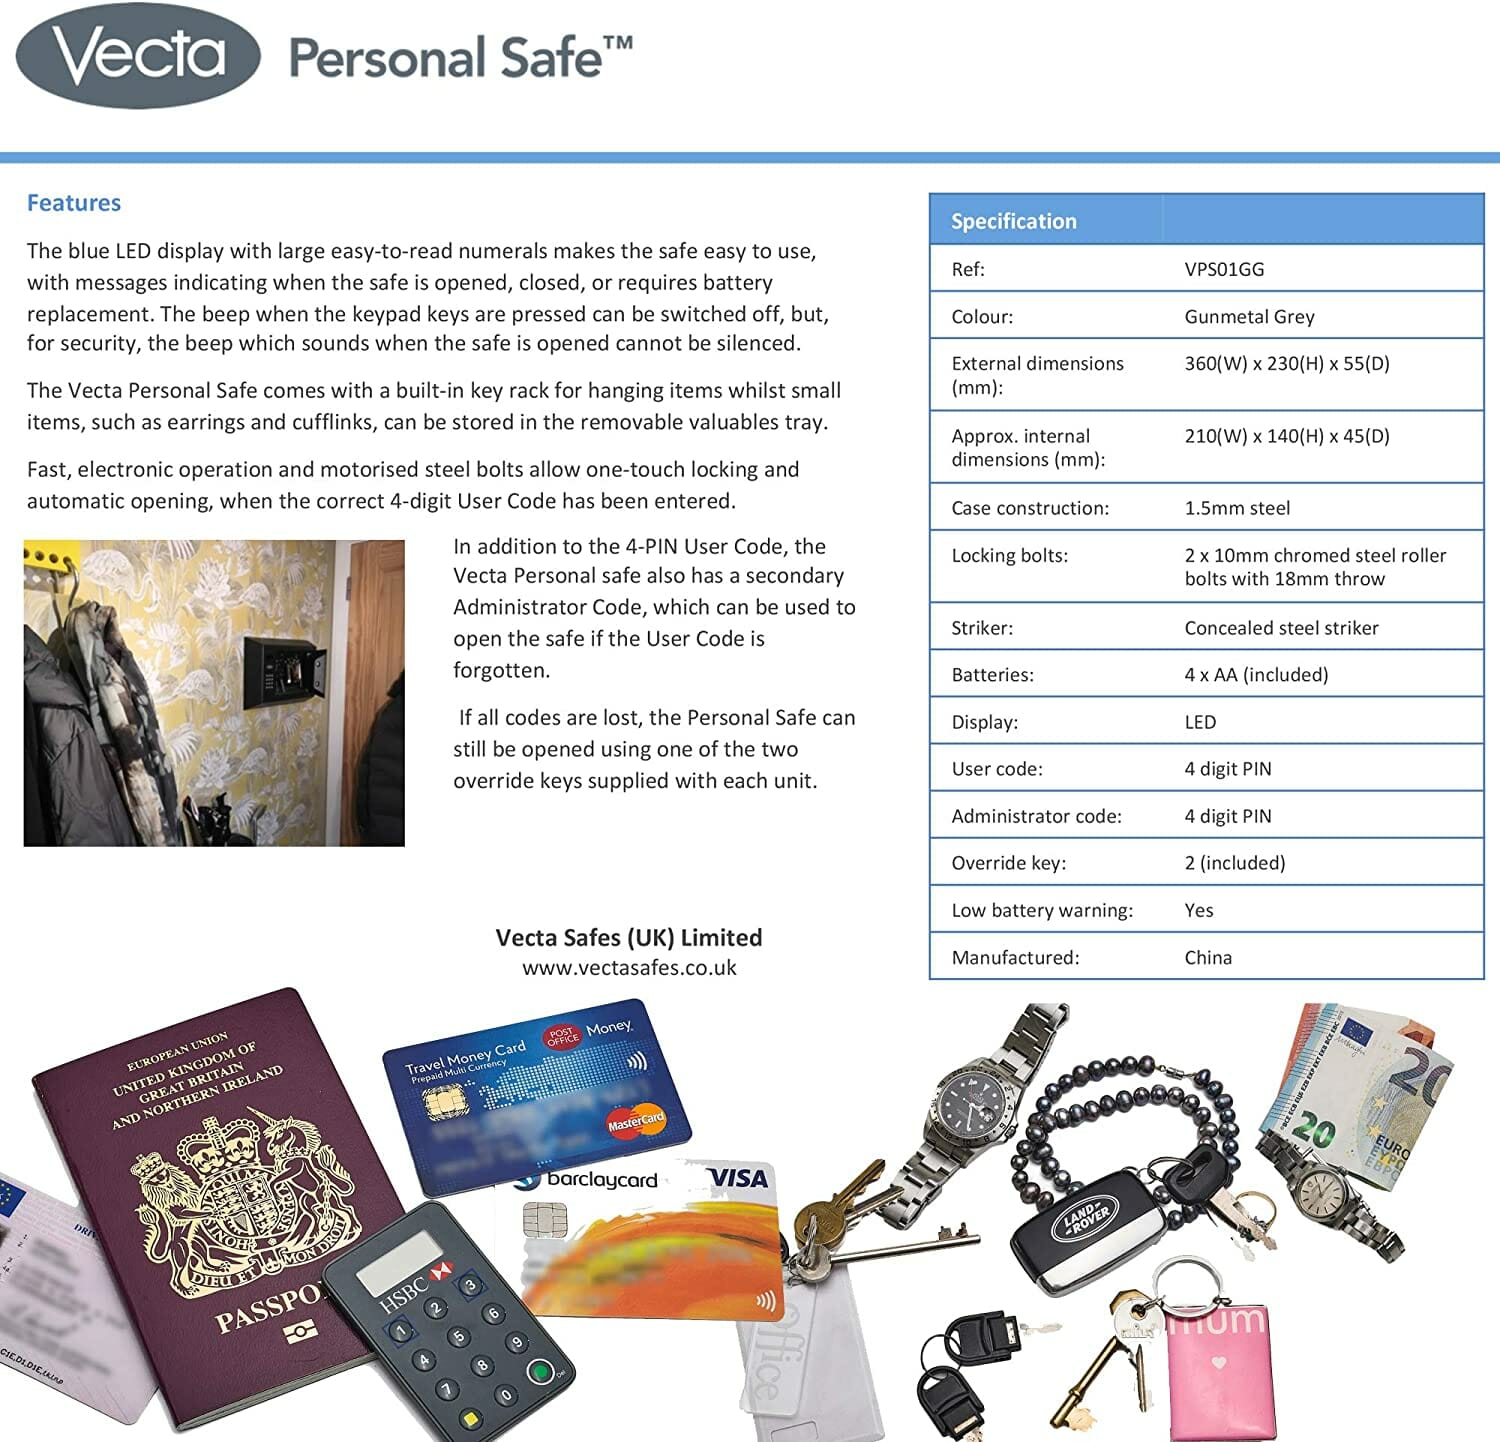 the vecta safe is available in the special offer